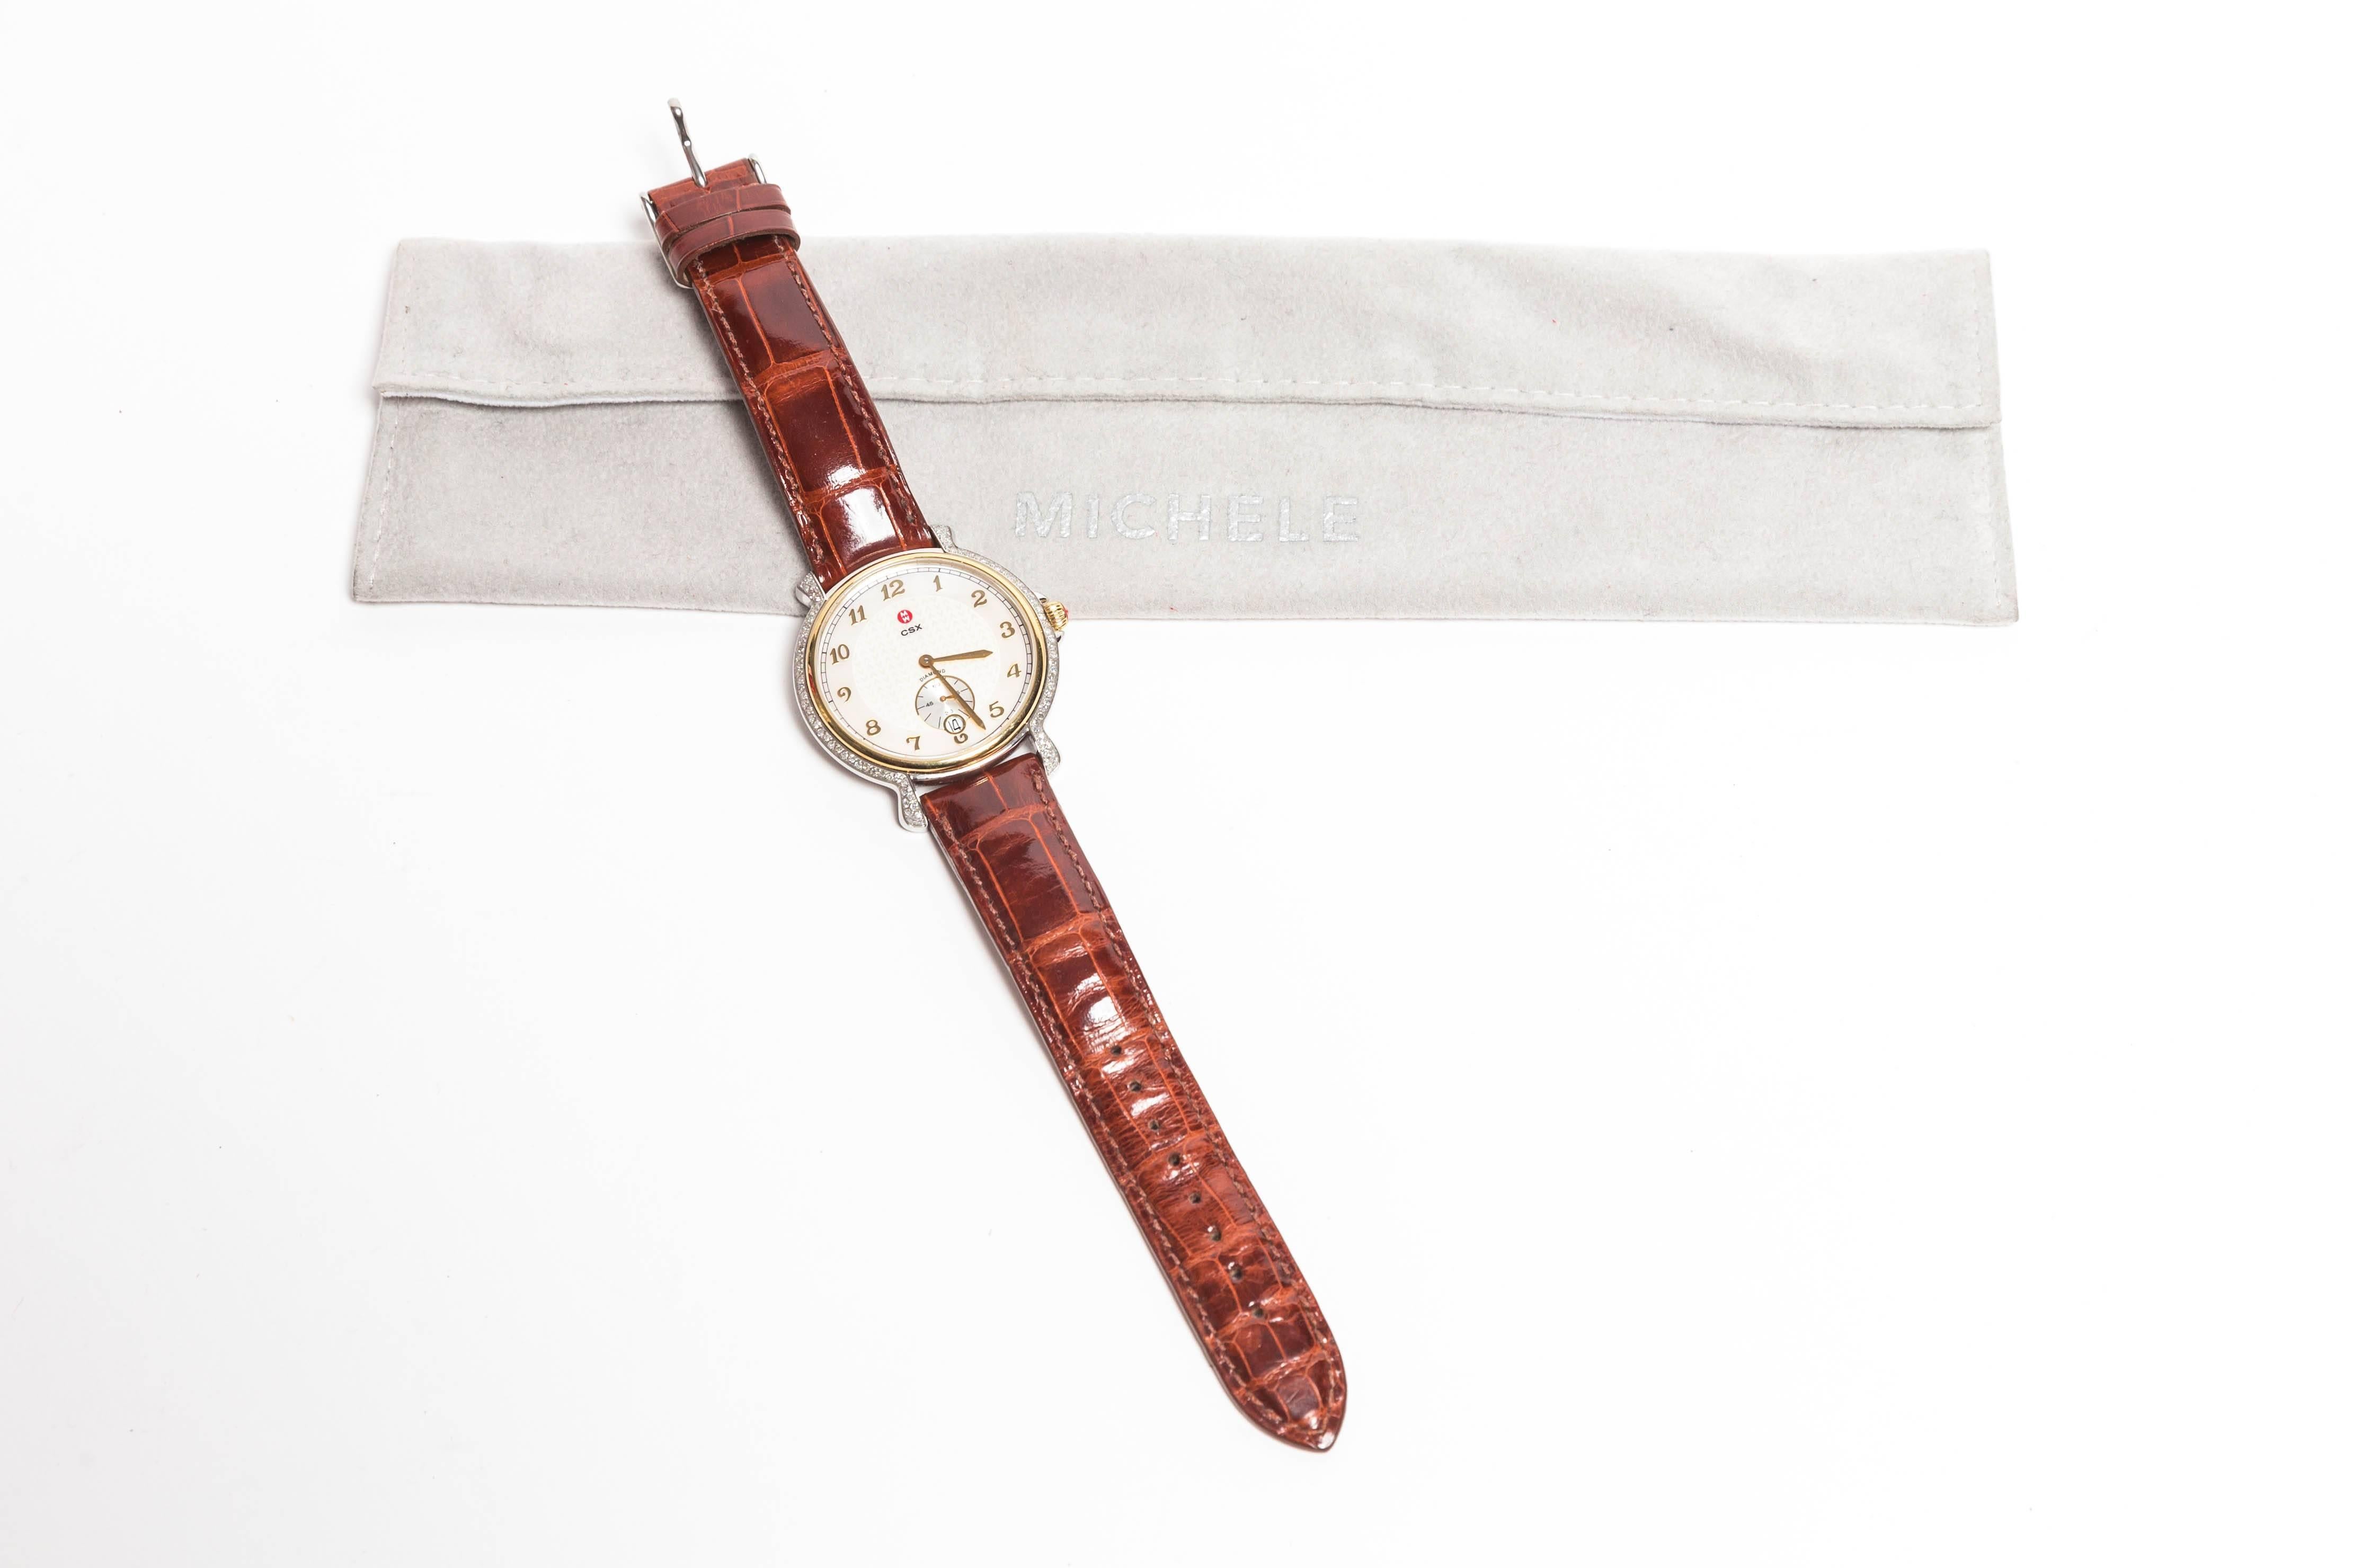 Michele Stainless Steel Watch with Date and Second Hand with Brown Alligator Strap
Diamonds accent the diameter and bezels of this gorgeous watch
Serial No CH02798SS
A service is required